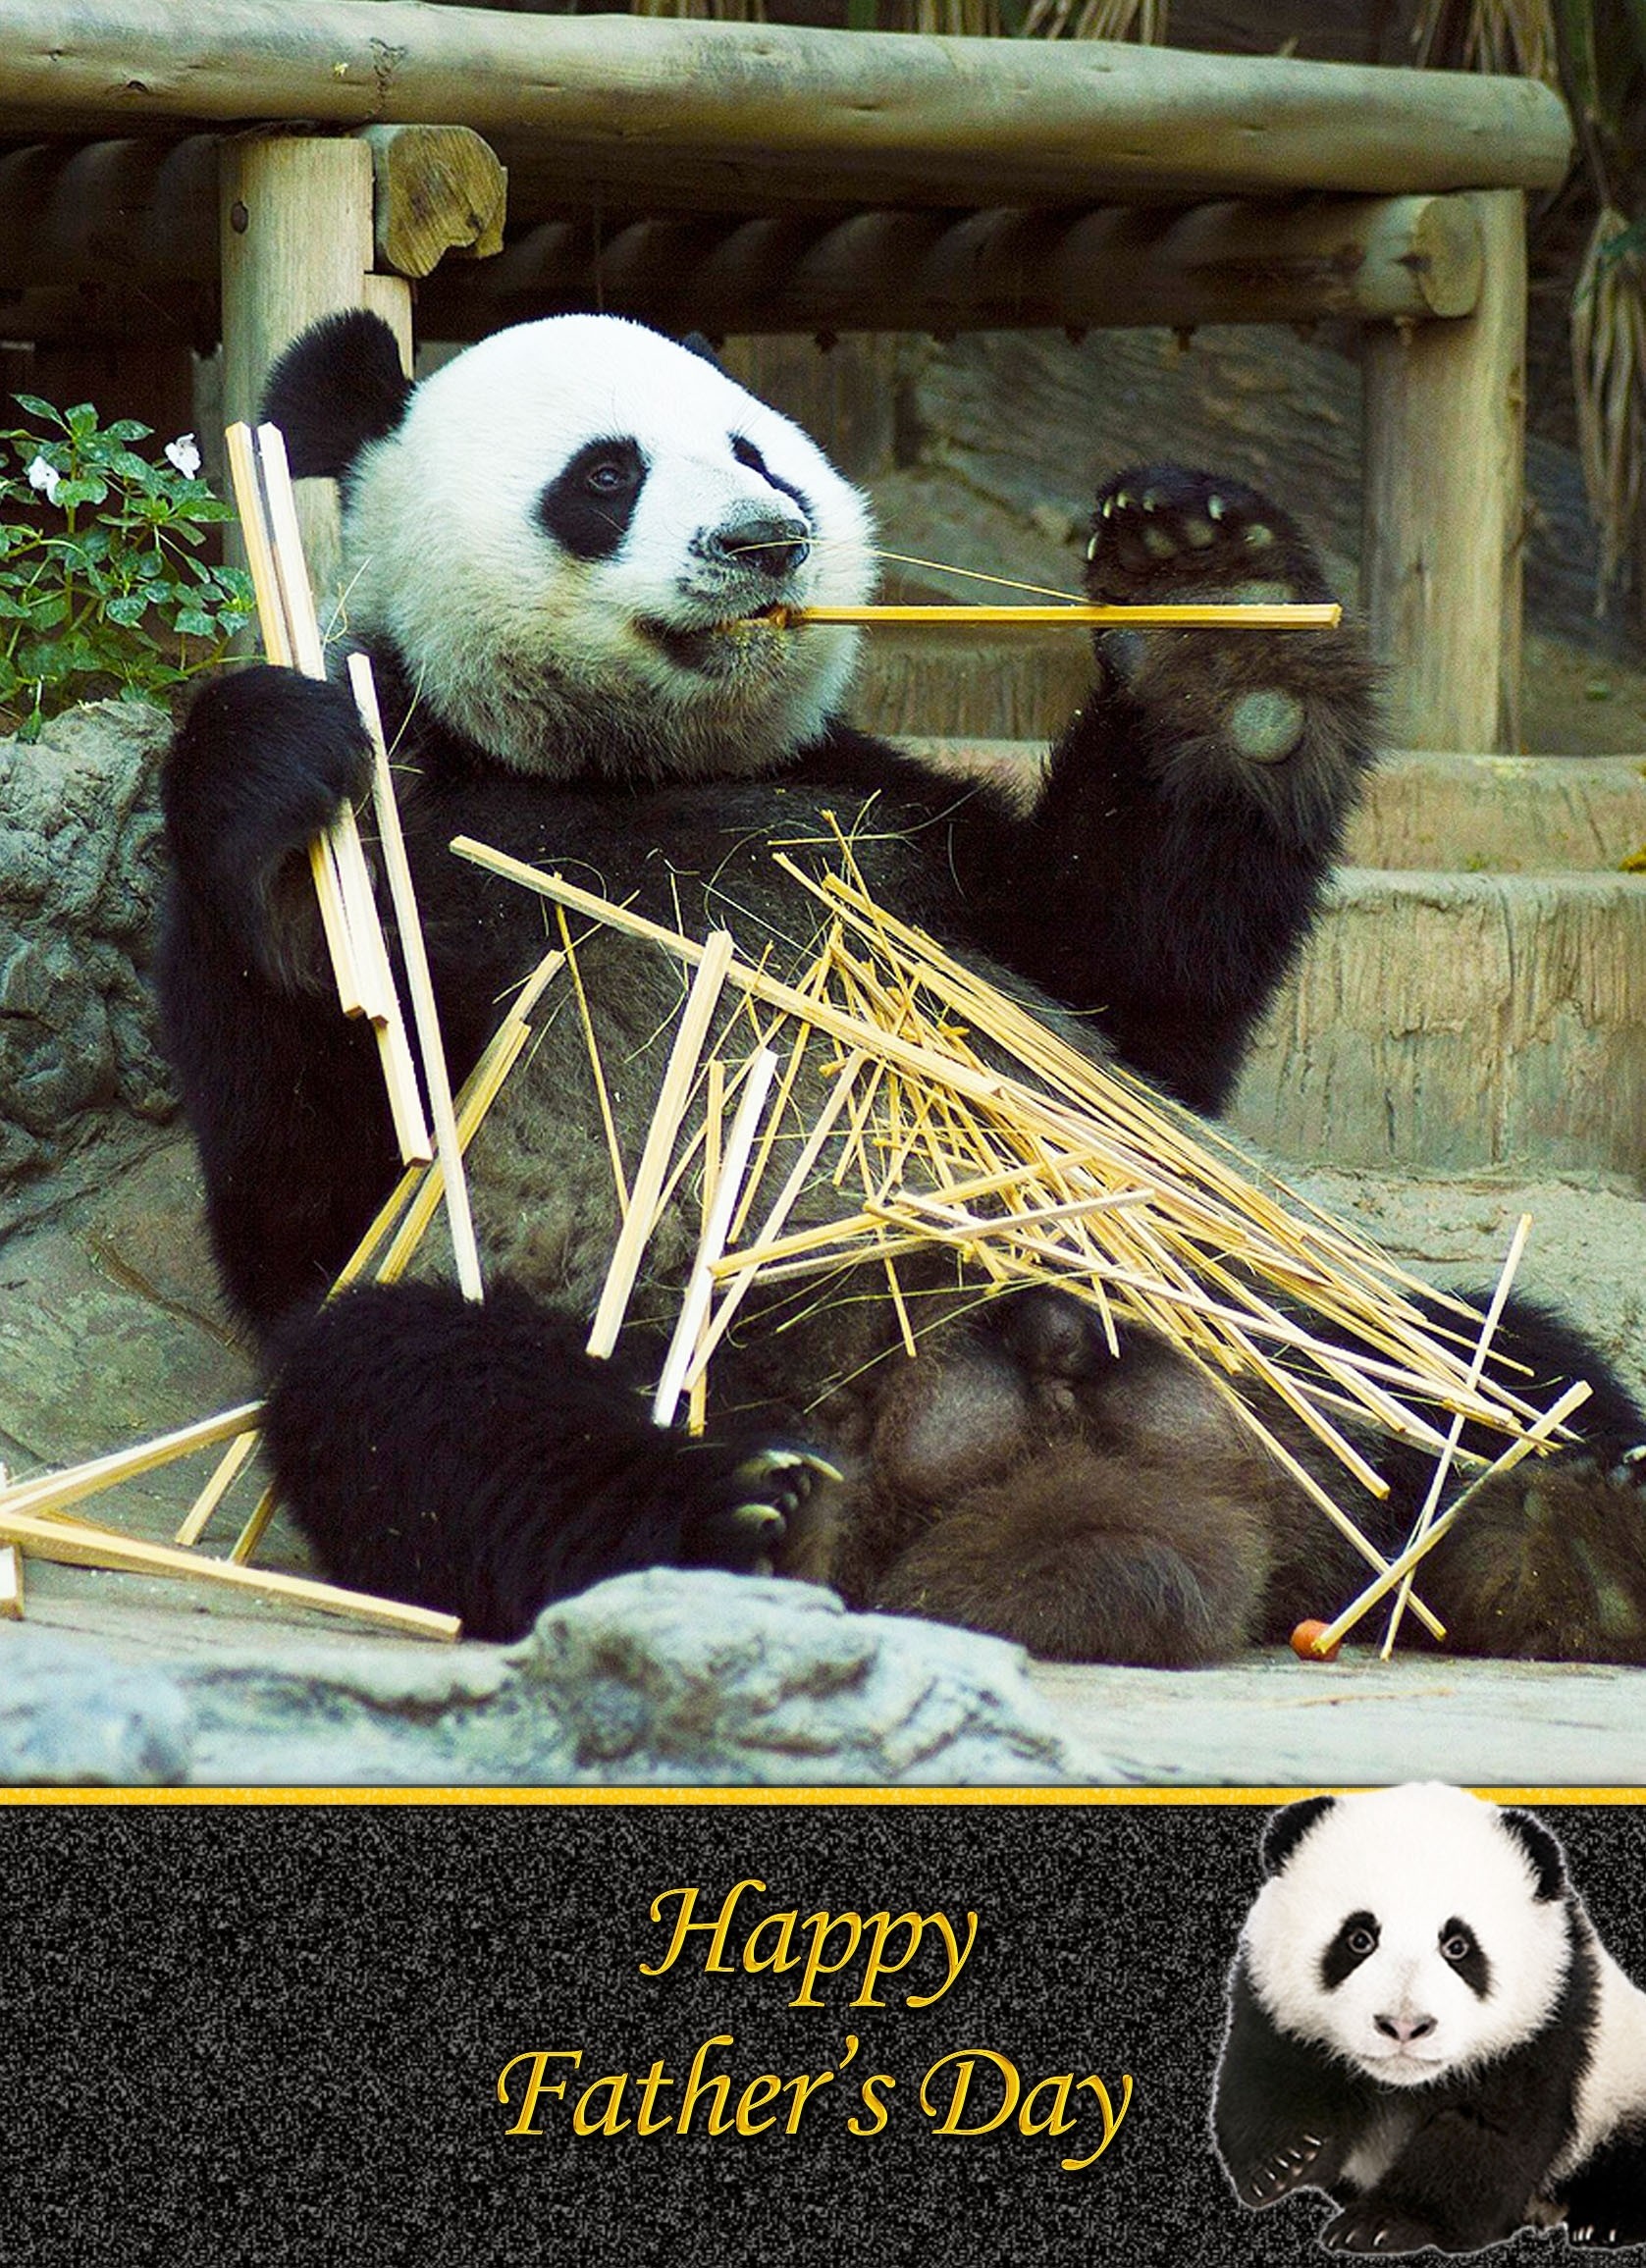 Panda Father's Day Card